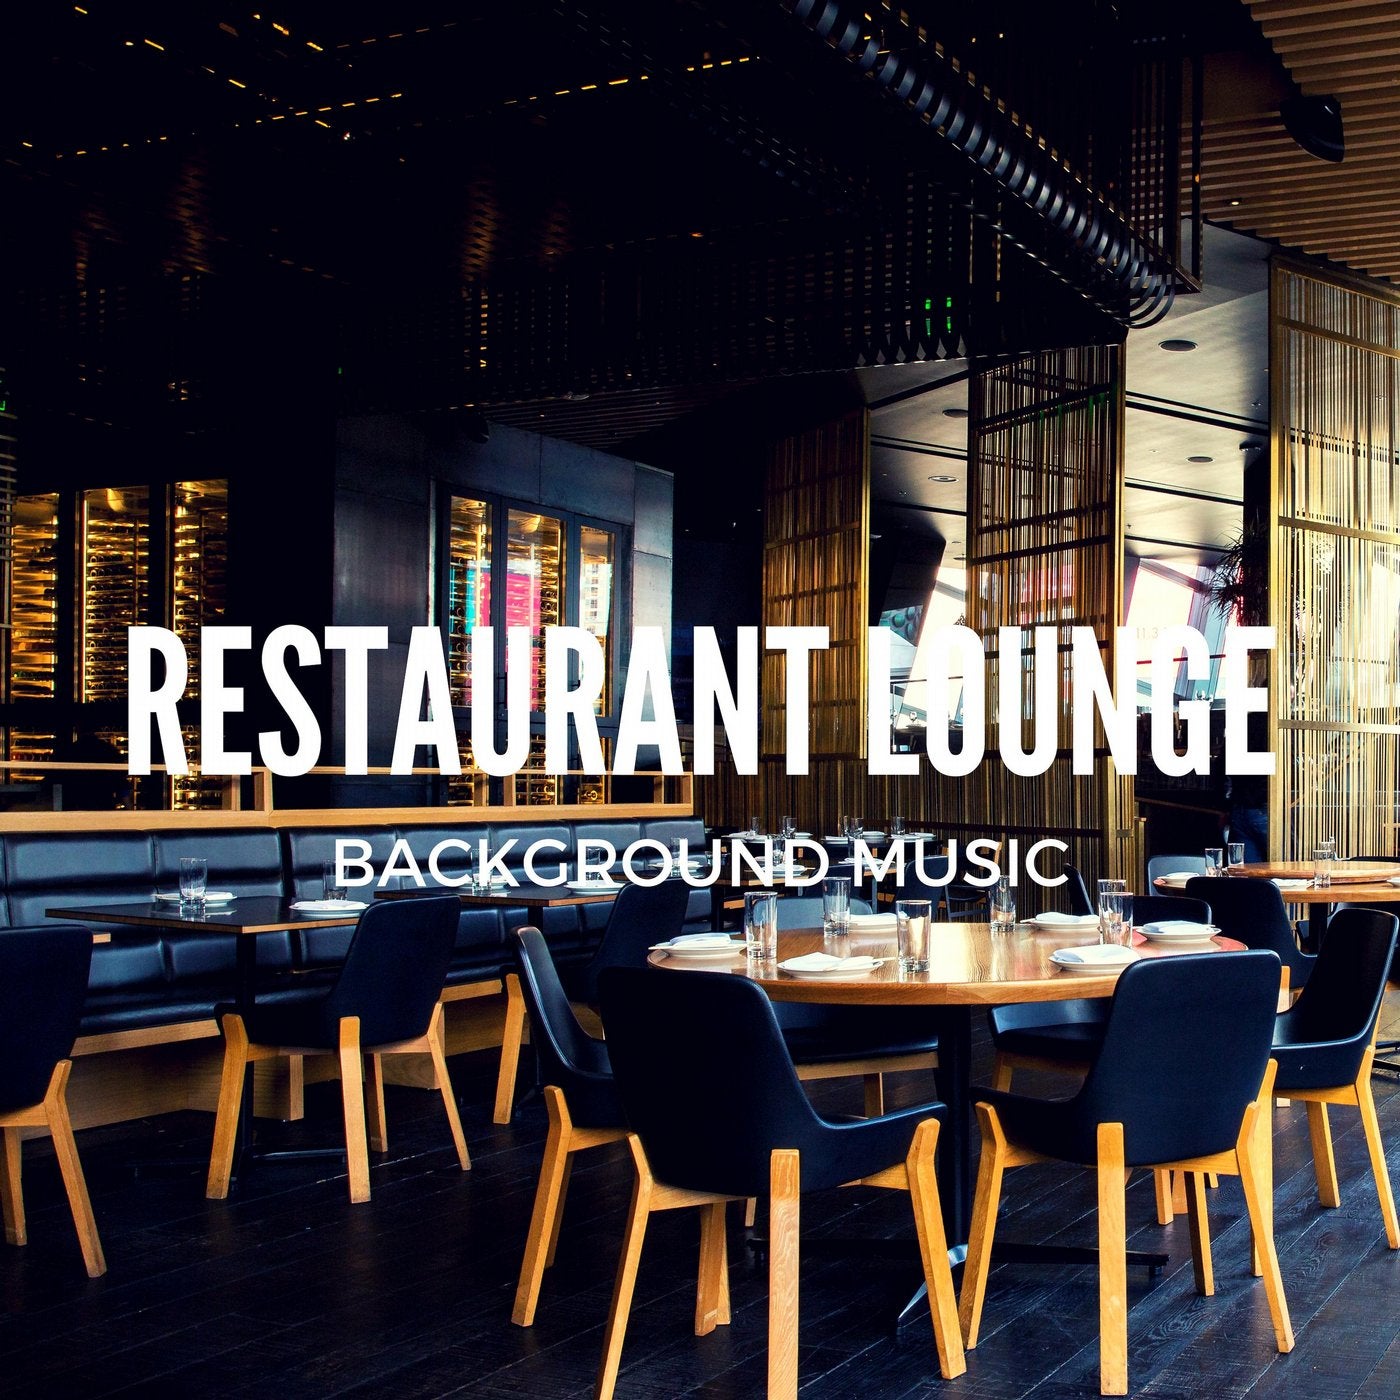 Restaurant Lounge Background Music, Vol. 2 (Finest Lounge, Smooth Jazz And Chill Music for Bars, Hotels and Restaurants)